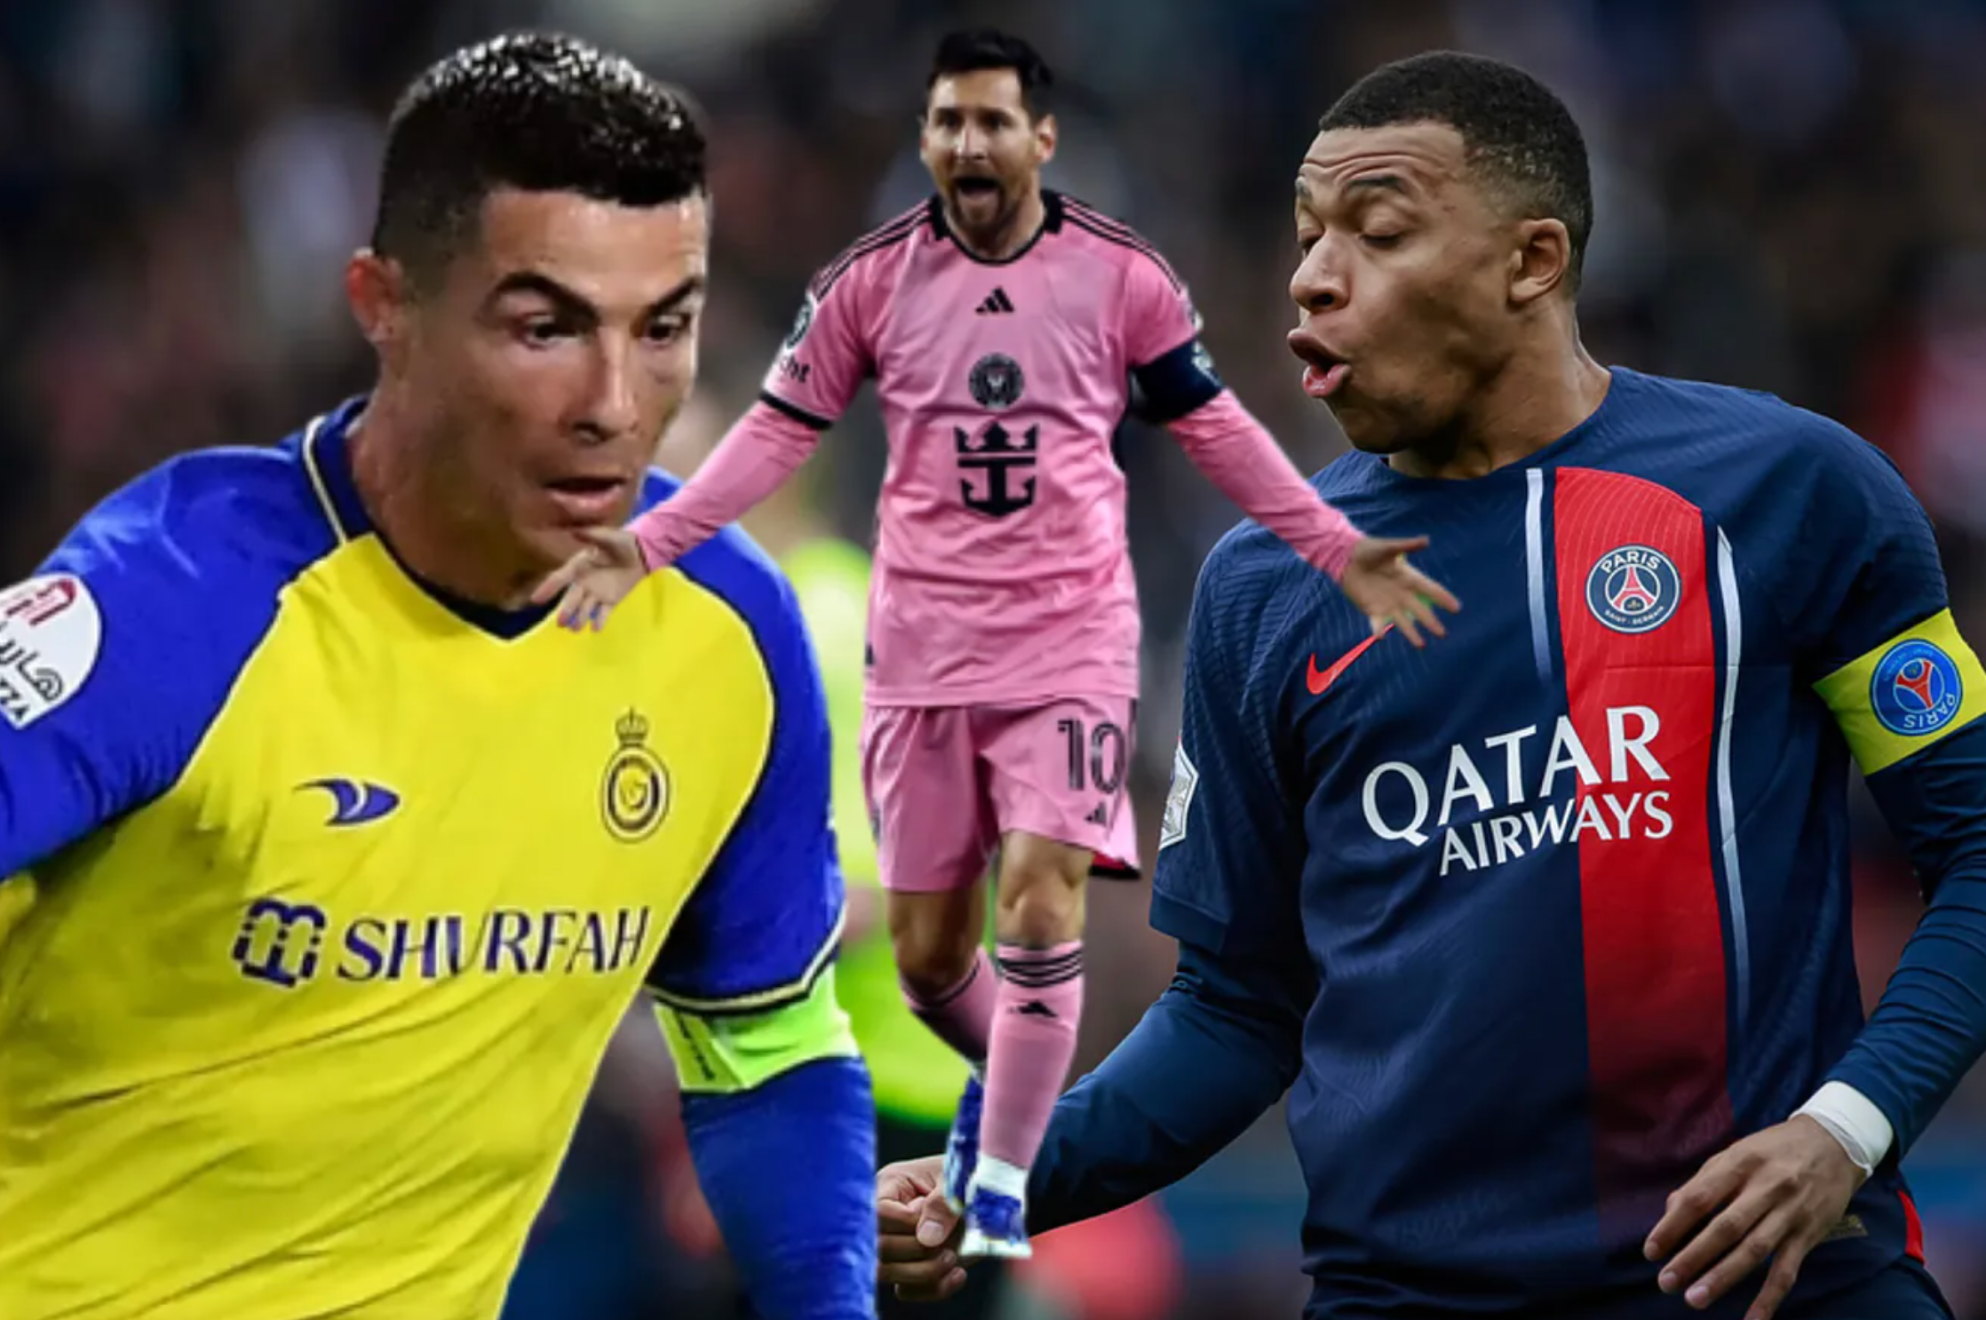 Cristiano Ronaldos record equalled by Mbappe, and both overtake Messi